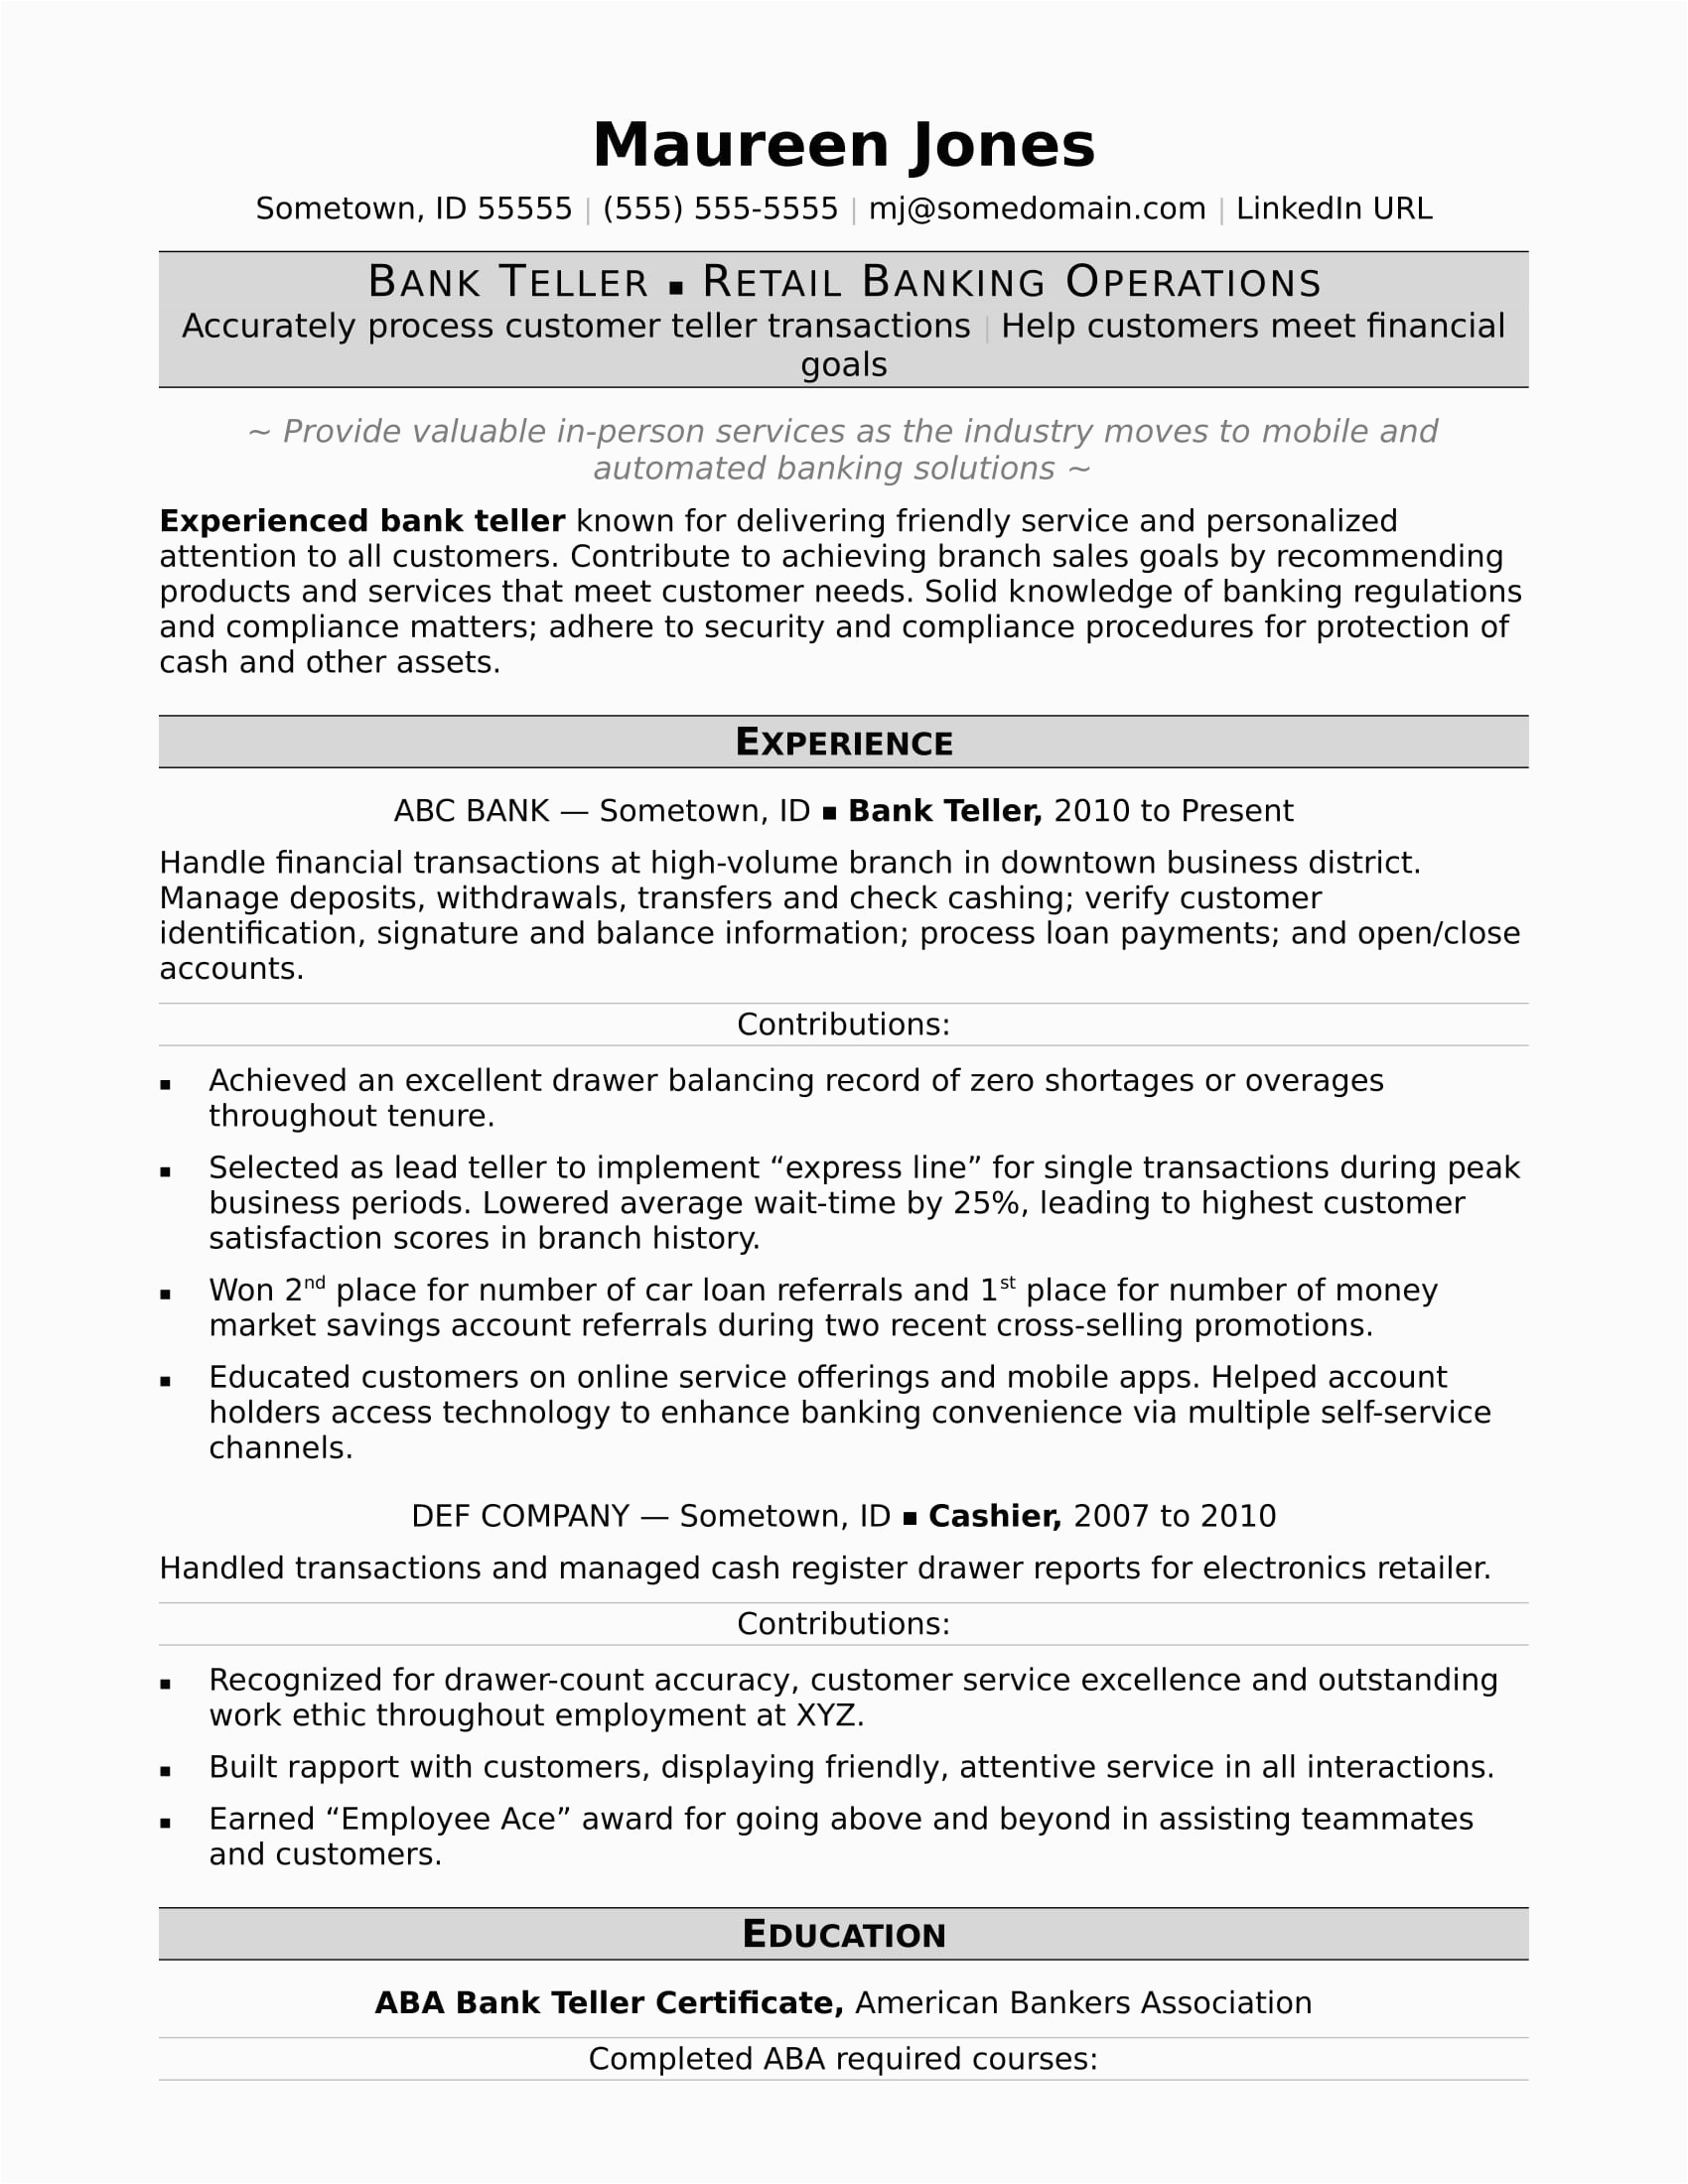 Sample Resume for Bank Teller with Experience Bank Teller Resume Sample